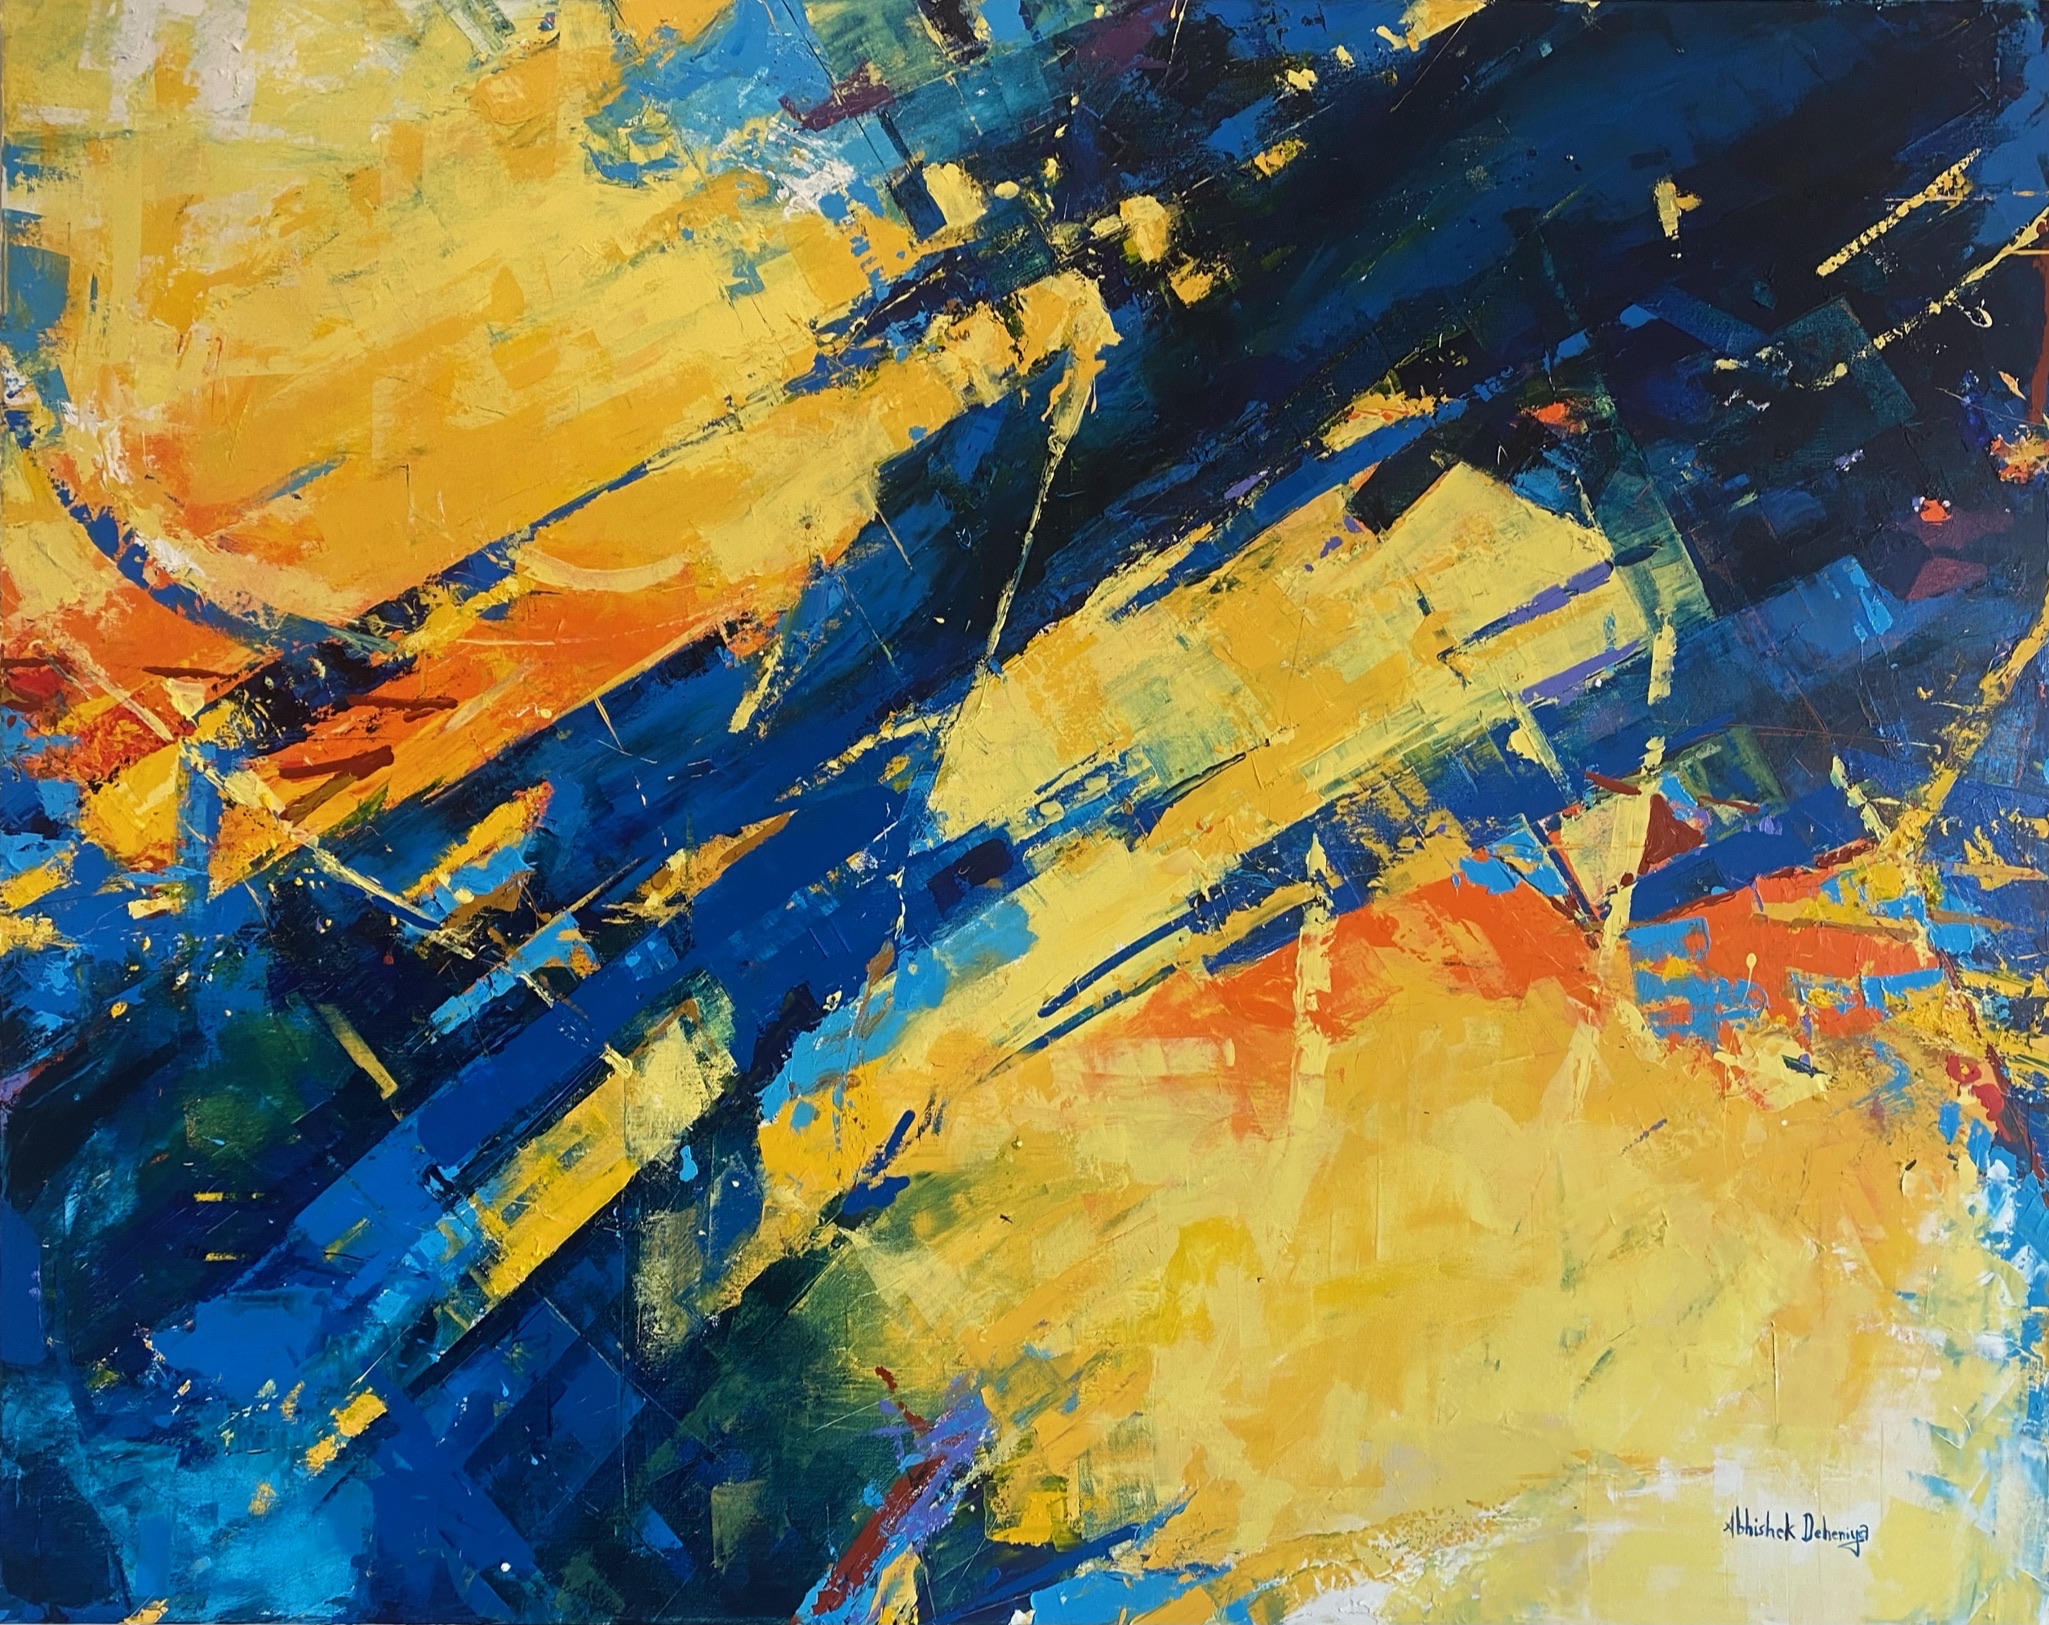 Harmony in Contrast: Textured Abstract Painting in Yellow and Blue